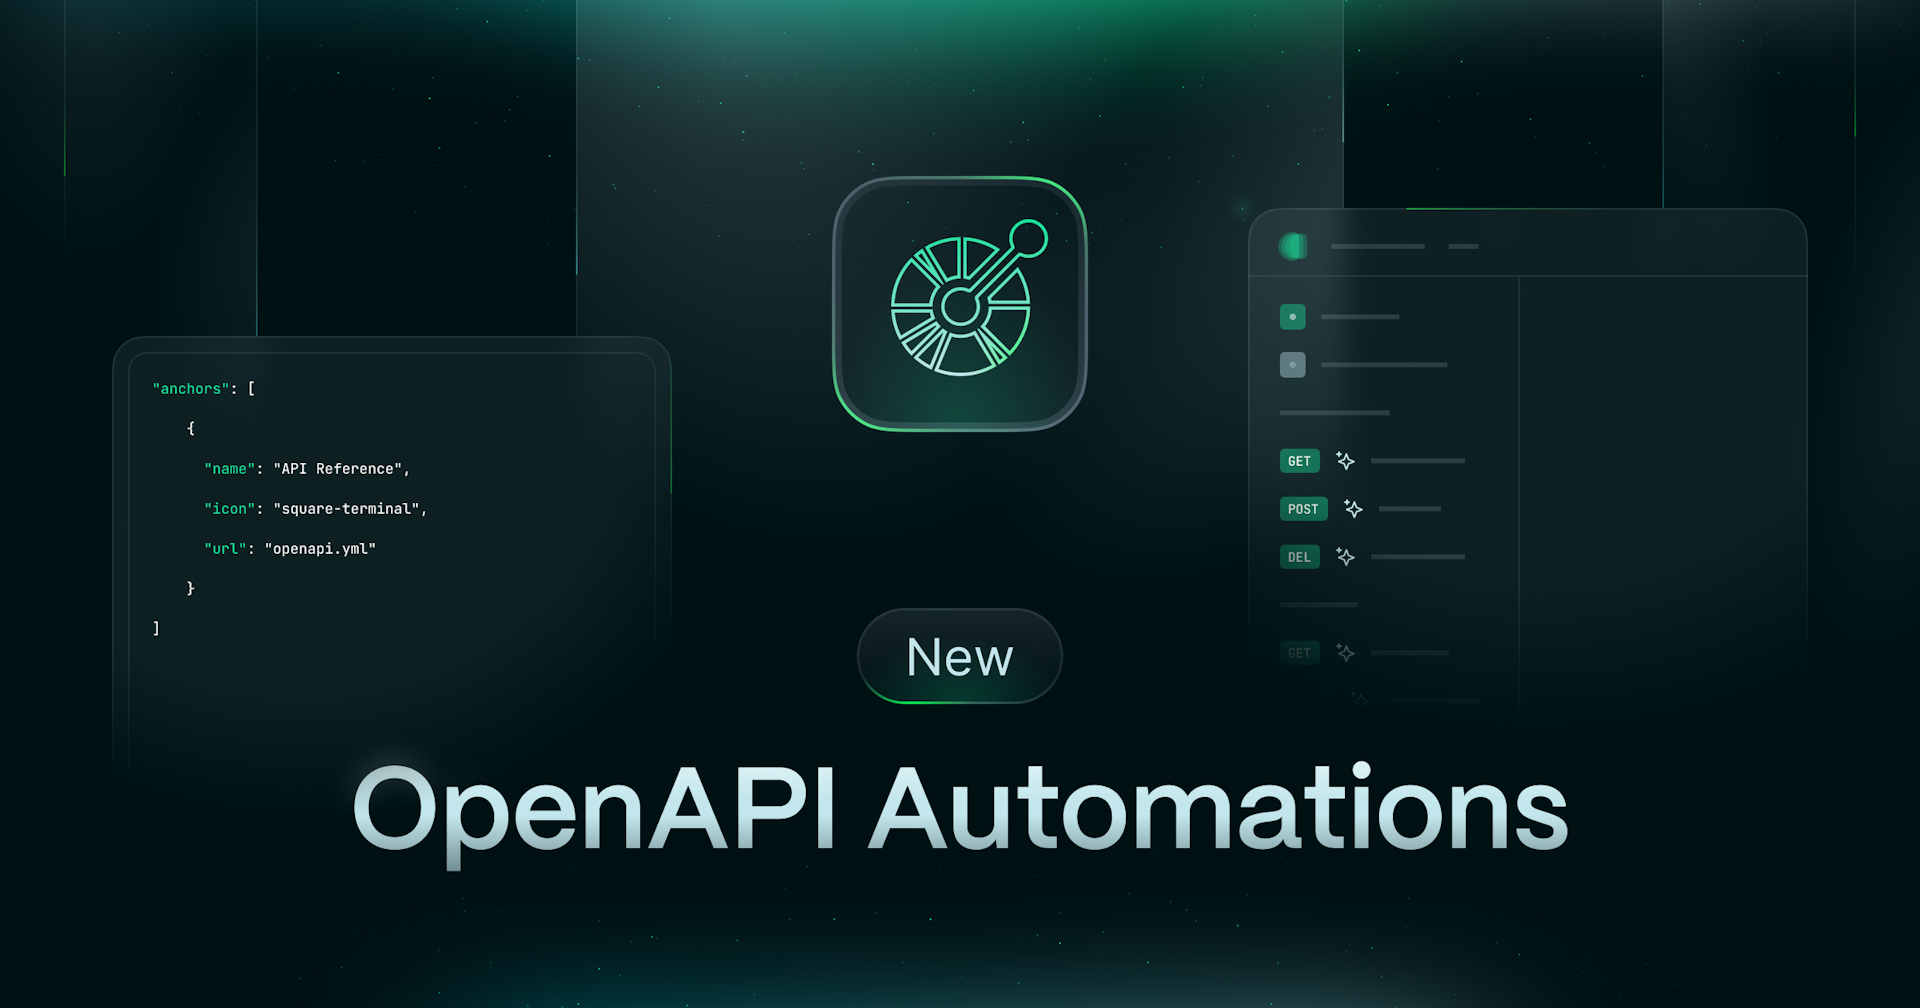 Launch Week III Day 5: OpenAPI Automations